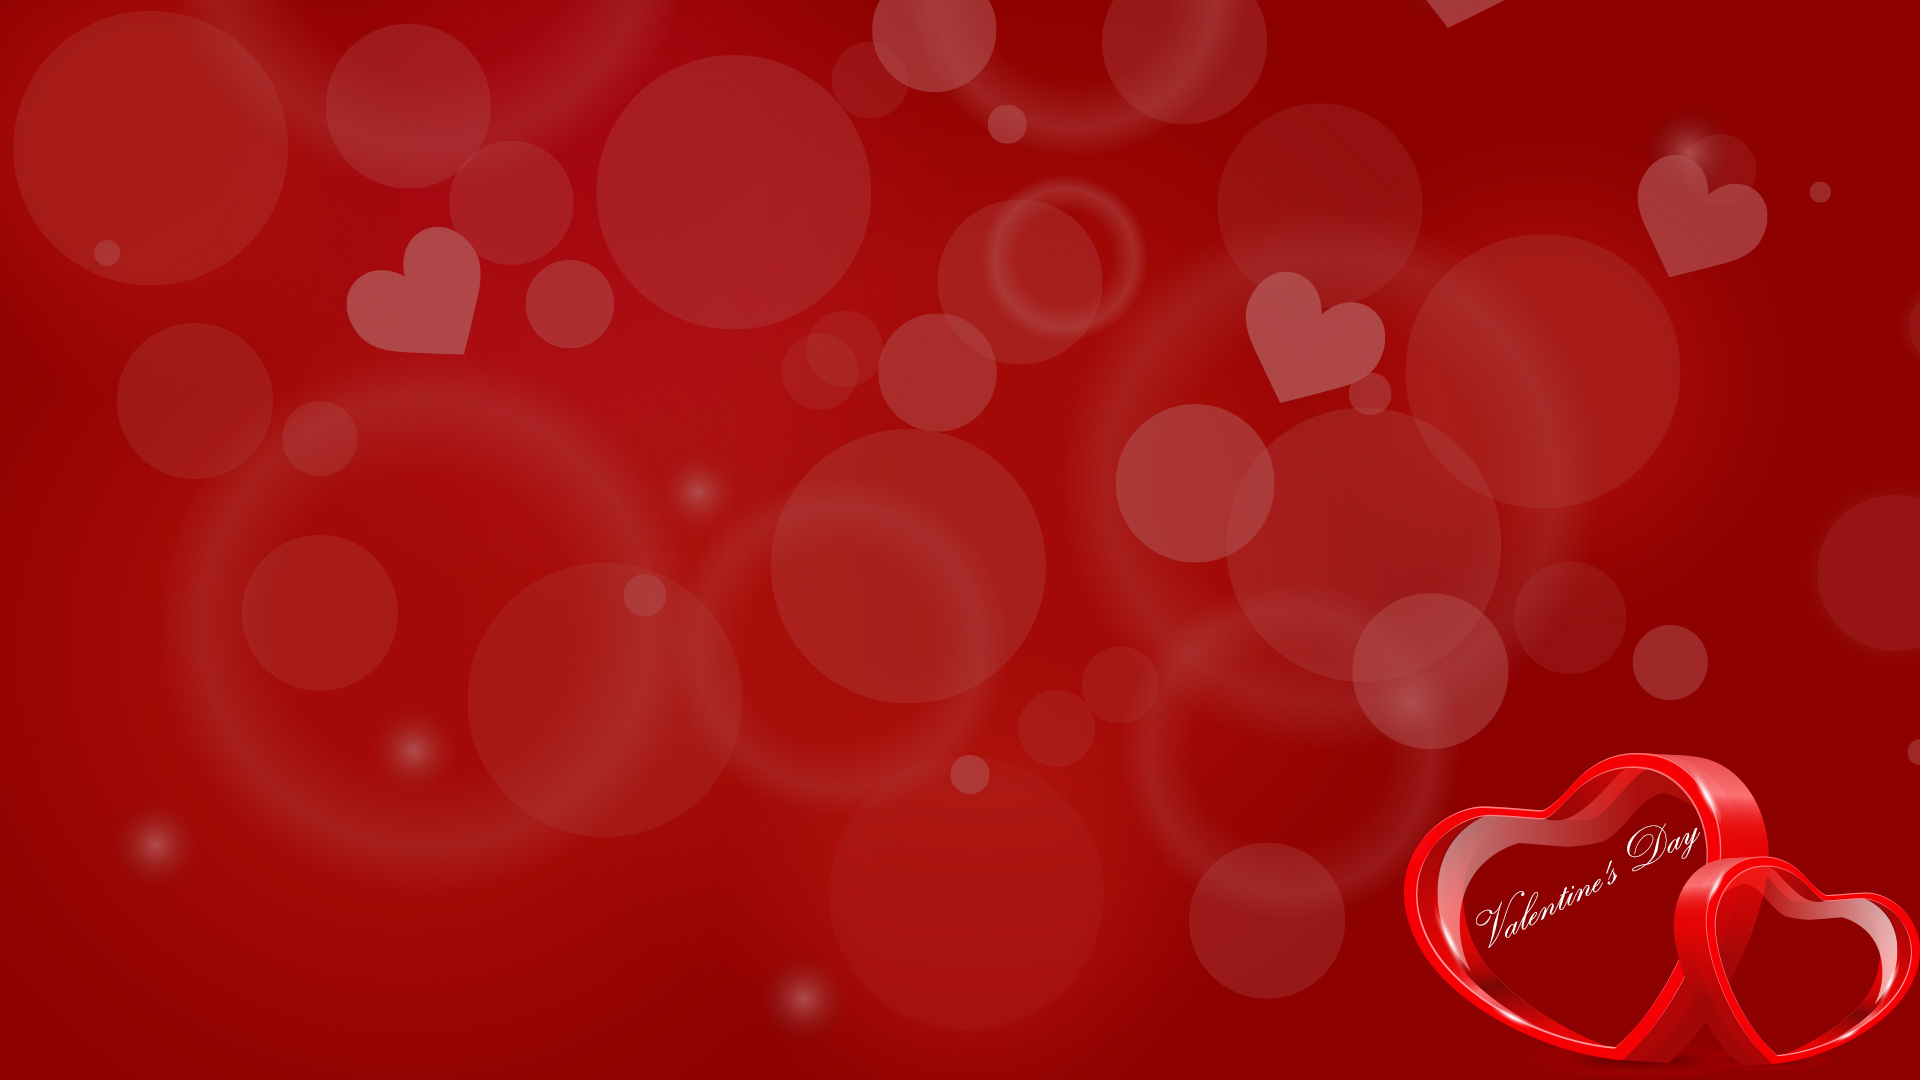 Valentines Day Heart Background For PowerPoint Love PPT Templates